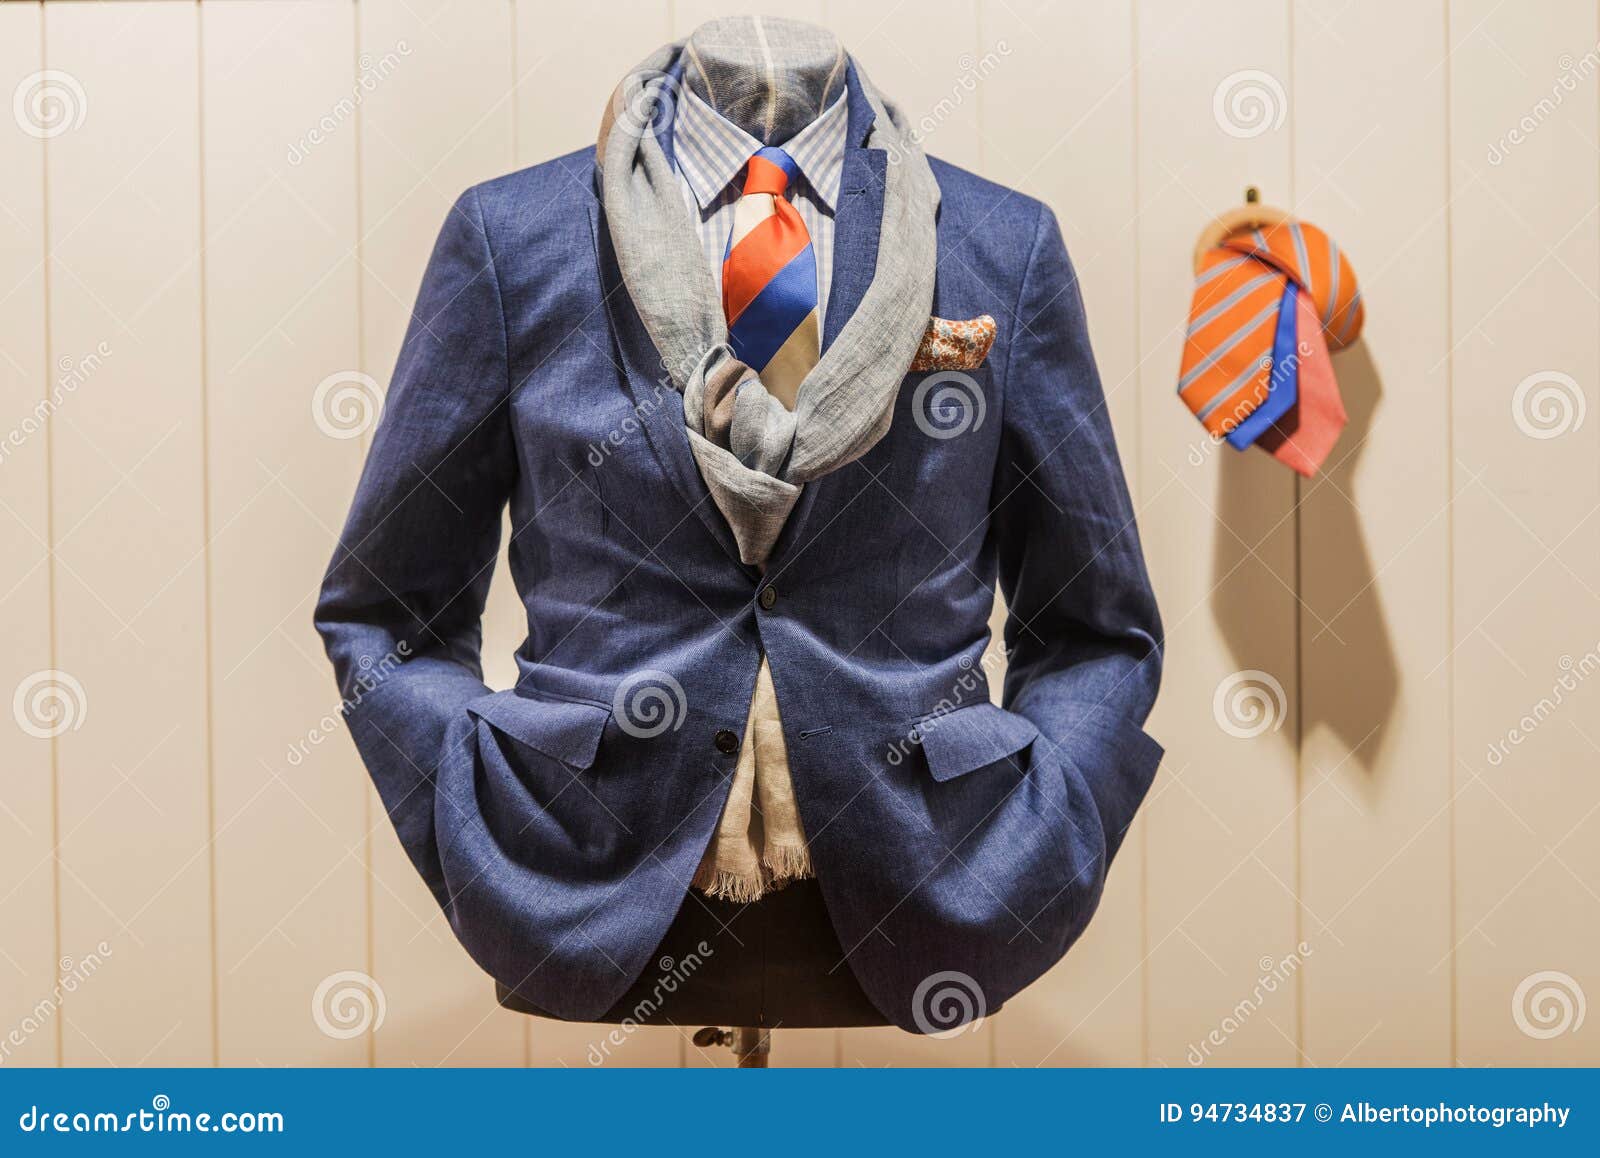 Men clothing stock image. Image of mannequin, professional - 94734837